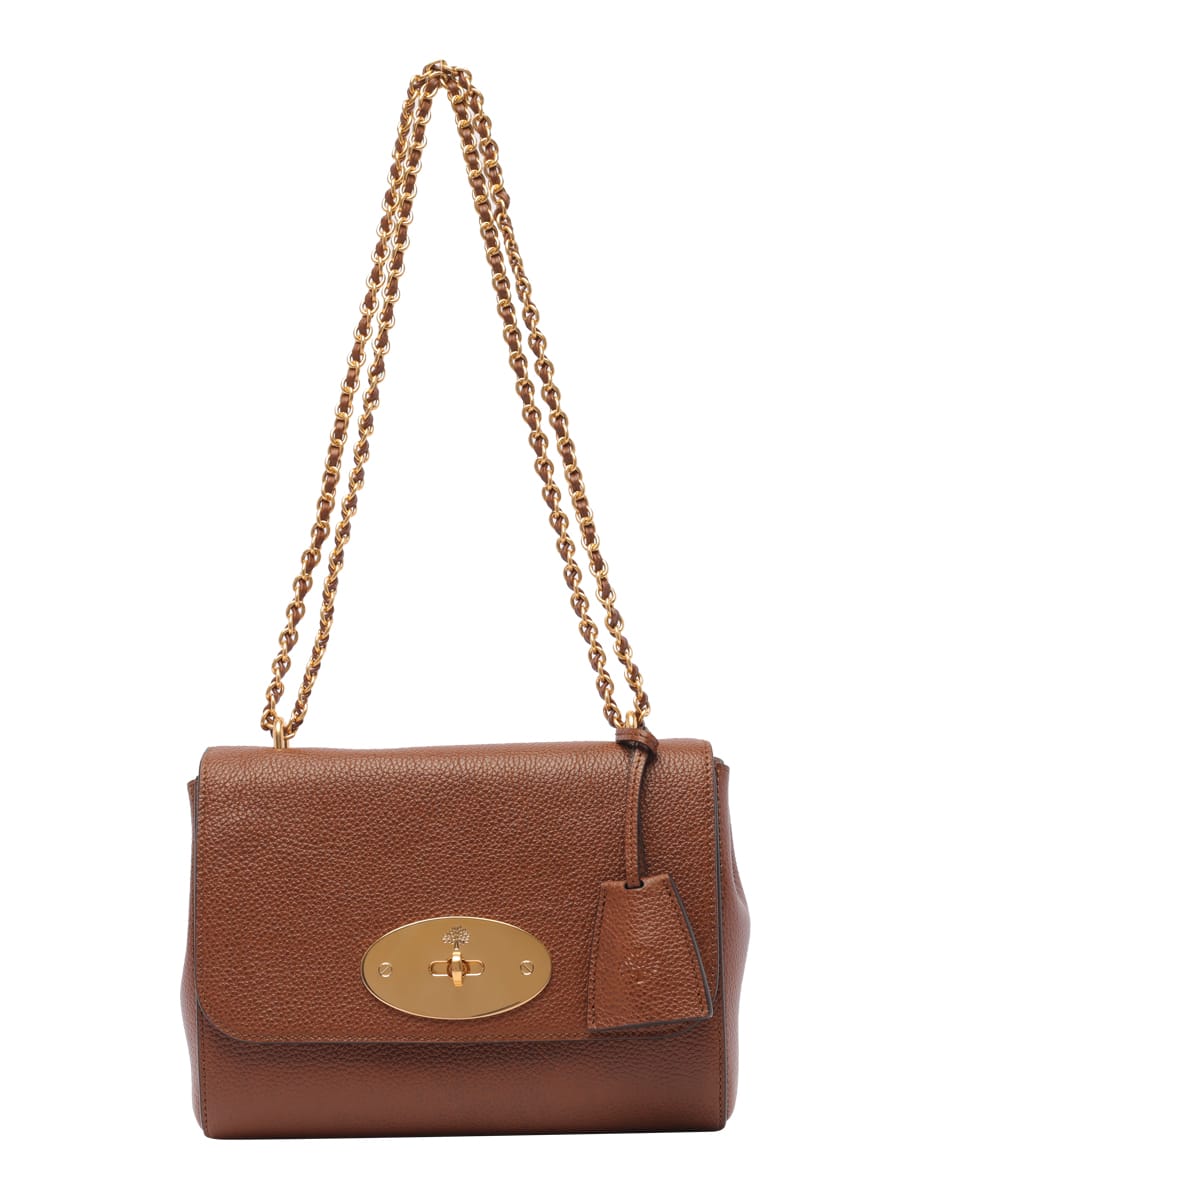 MULBERRY LILY CROSSBODY BAG